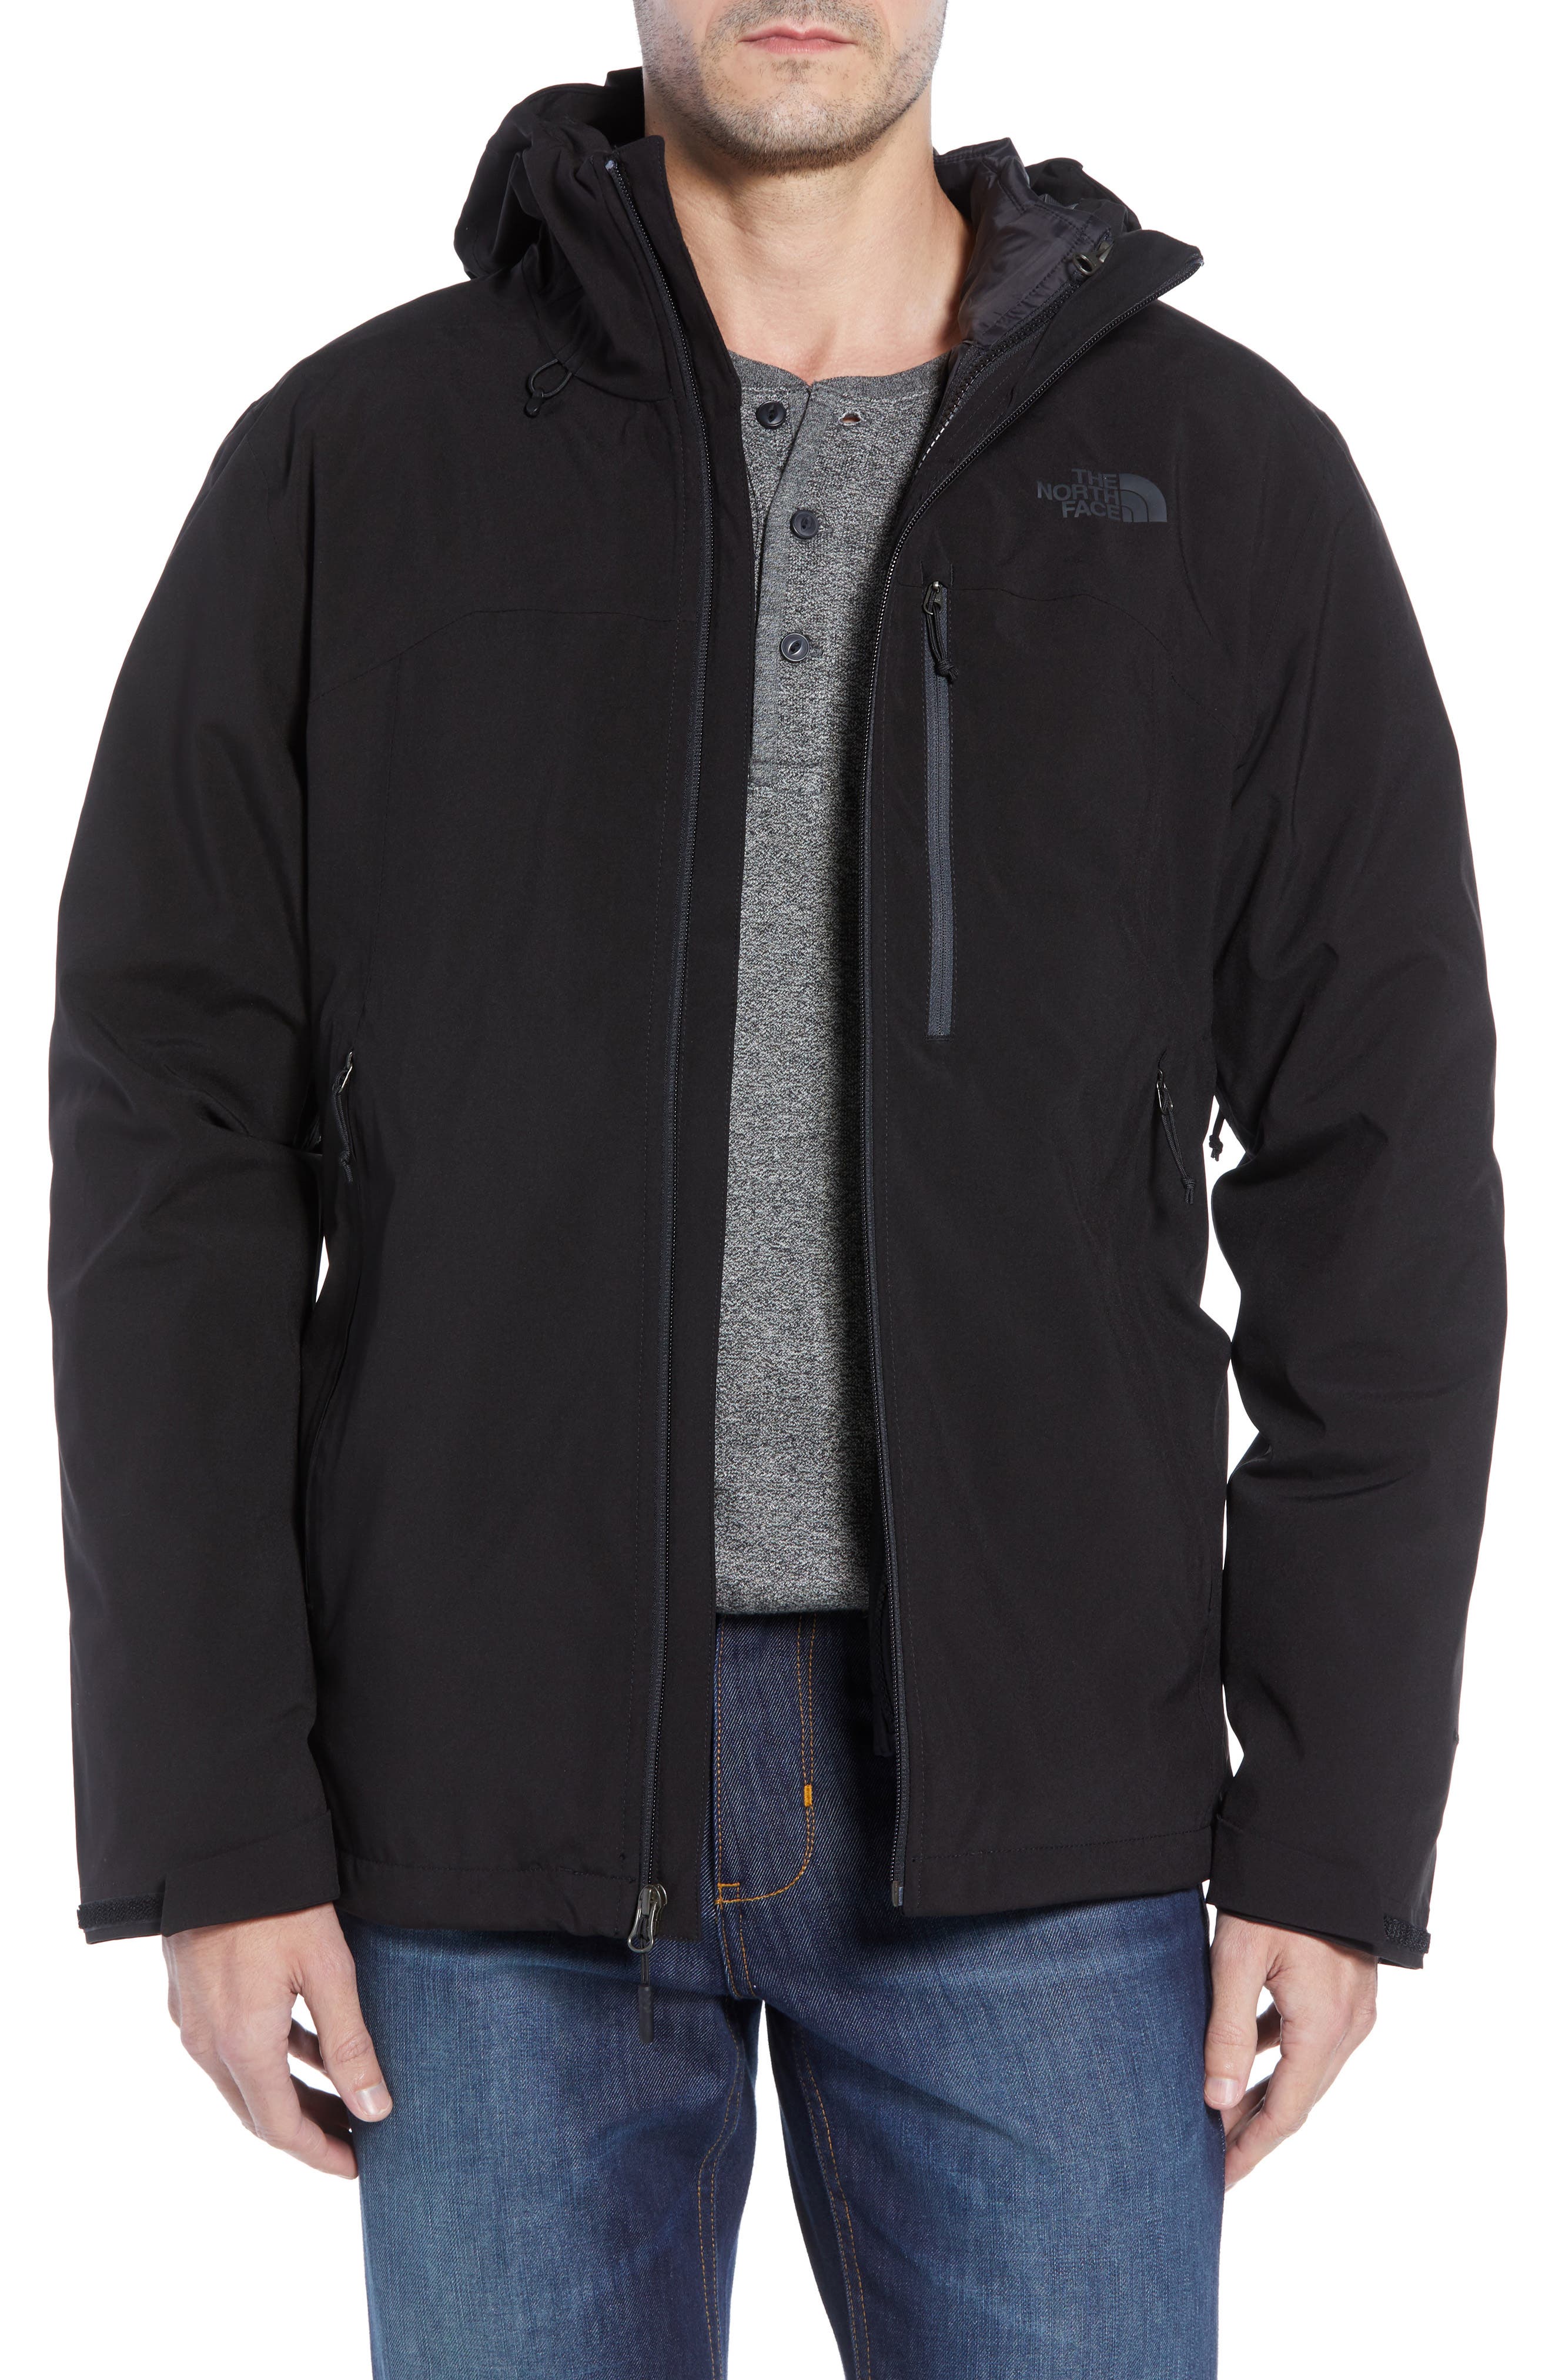 north face thermoball 3 in 1 jacket